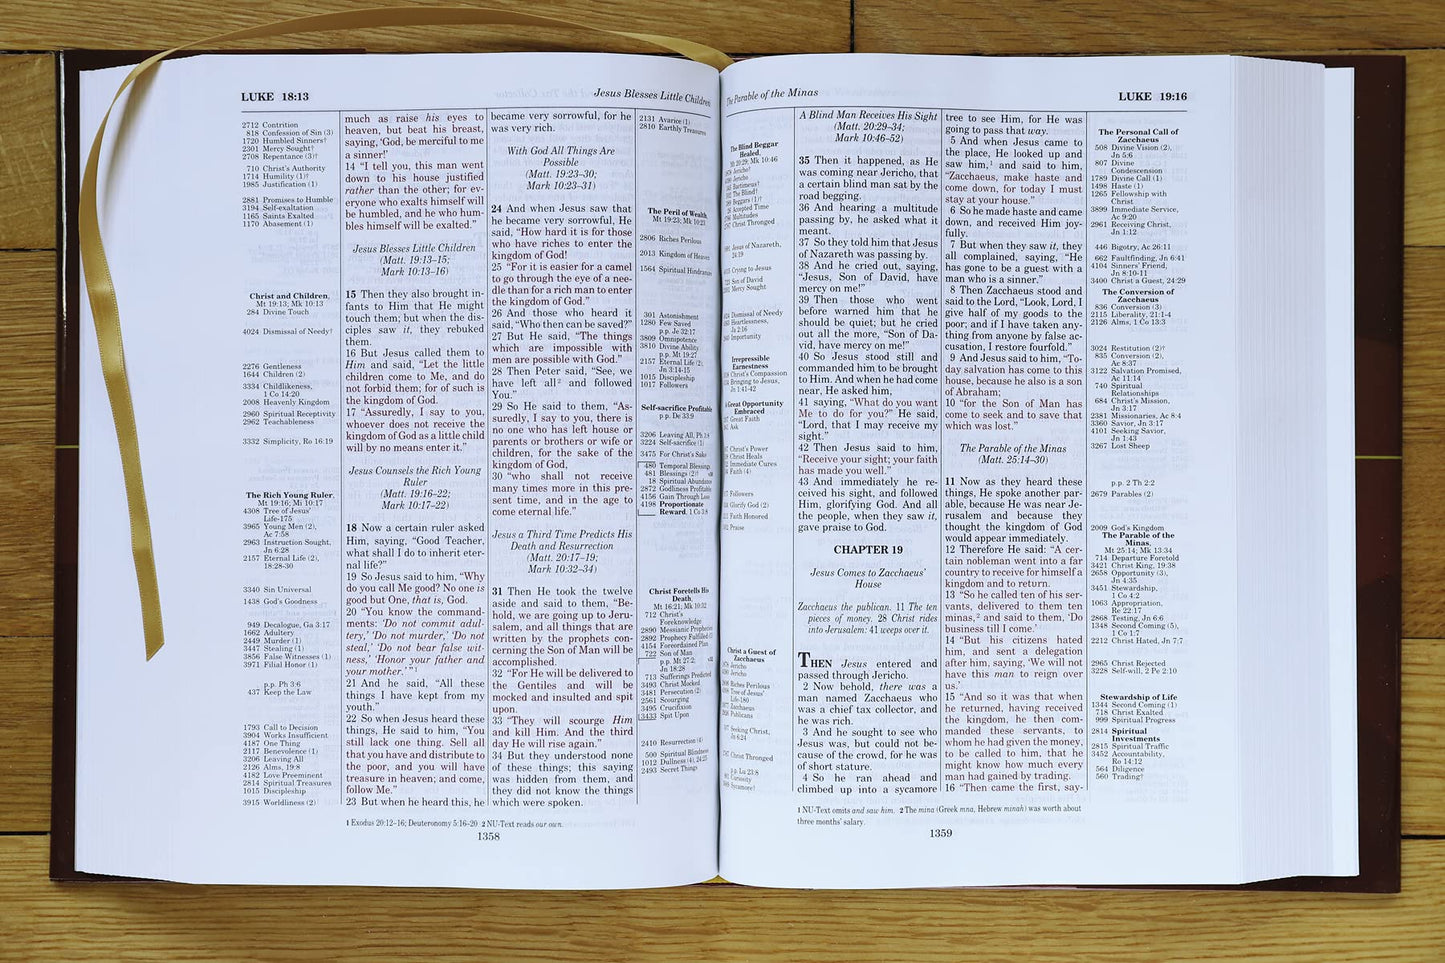 Thompson Chain-Reference Bible NKJV Hardcover